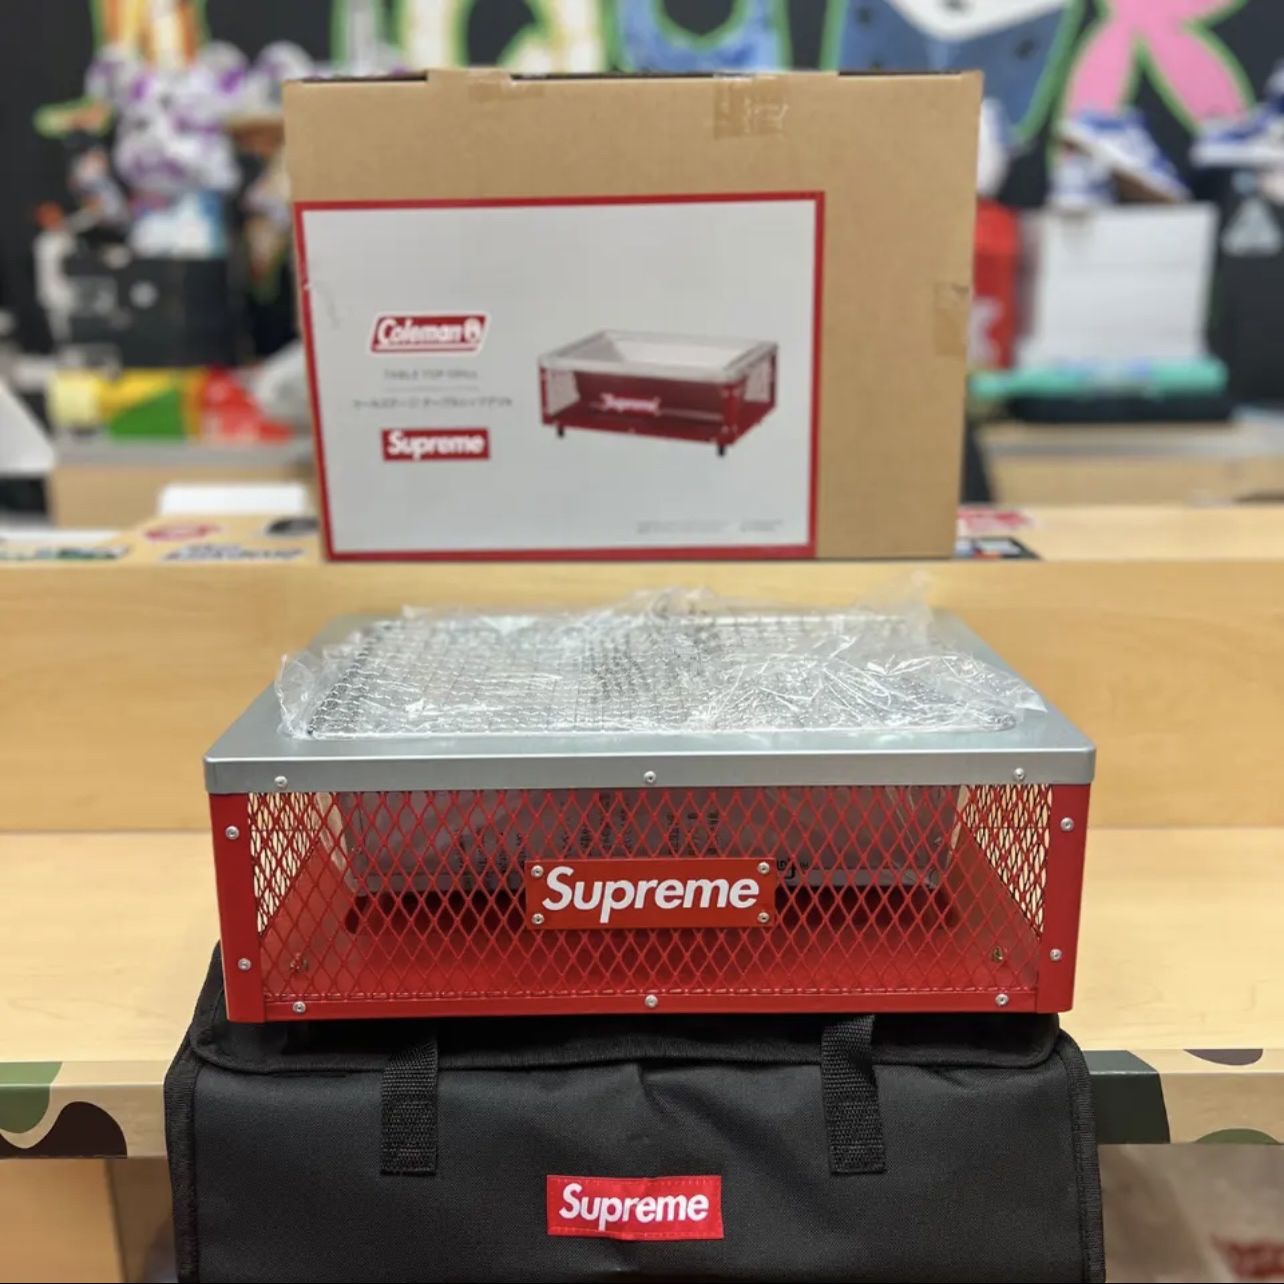 SUPREME/COLEMAN CHARCOAL GRILL (IN HAND) for Sale in